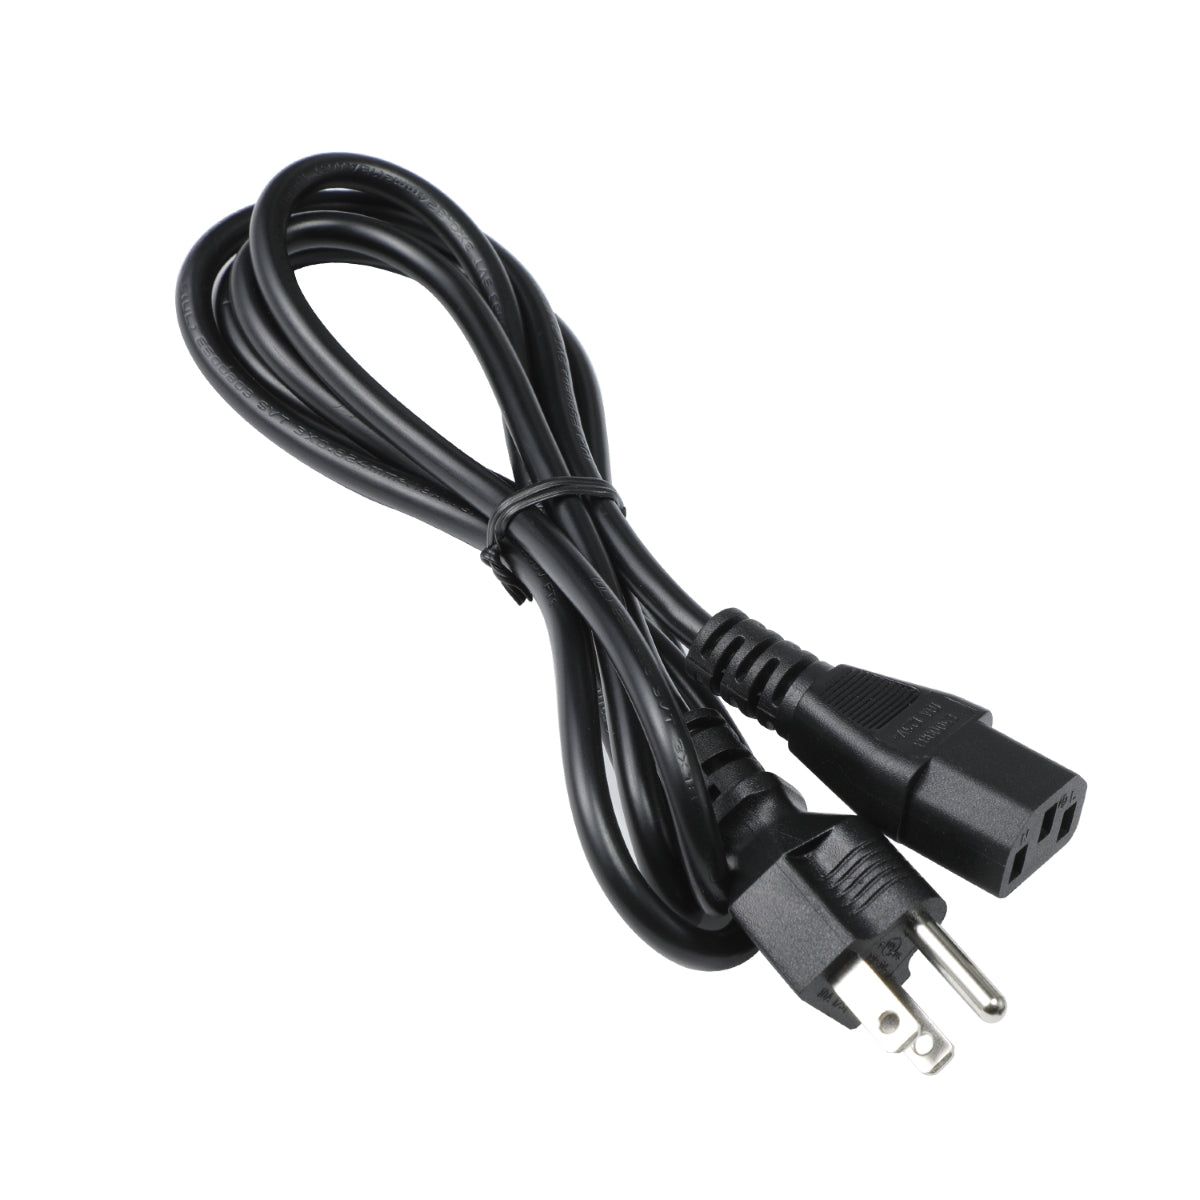 Power Cord for Dell D2719HGF Monitor.